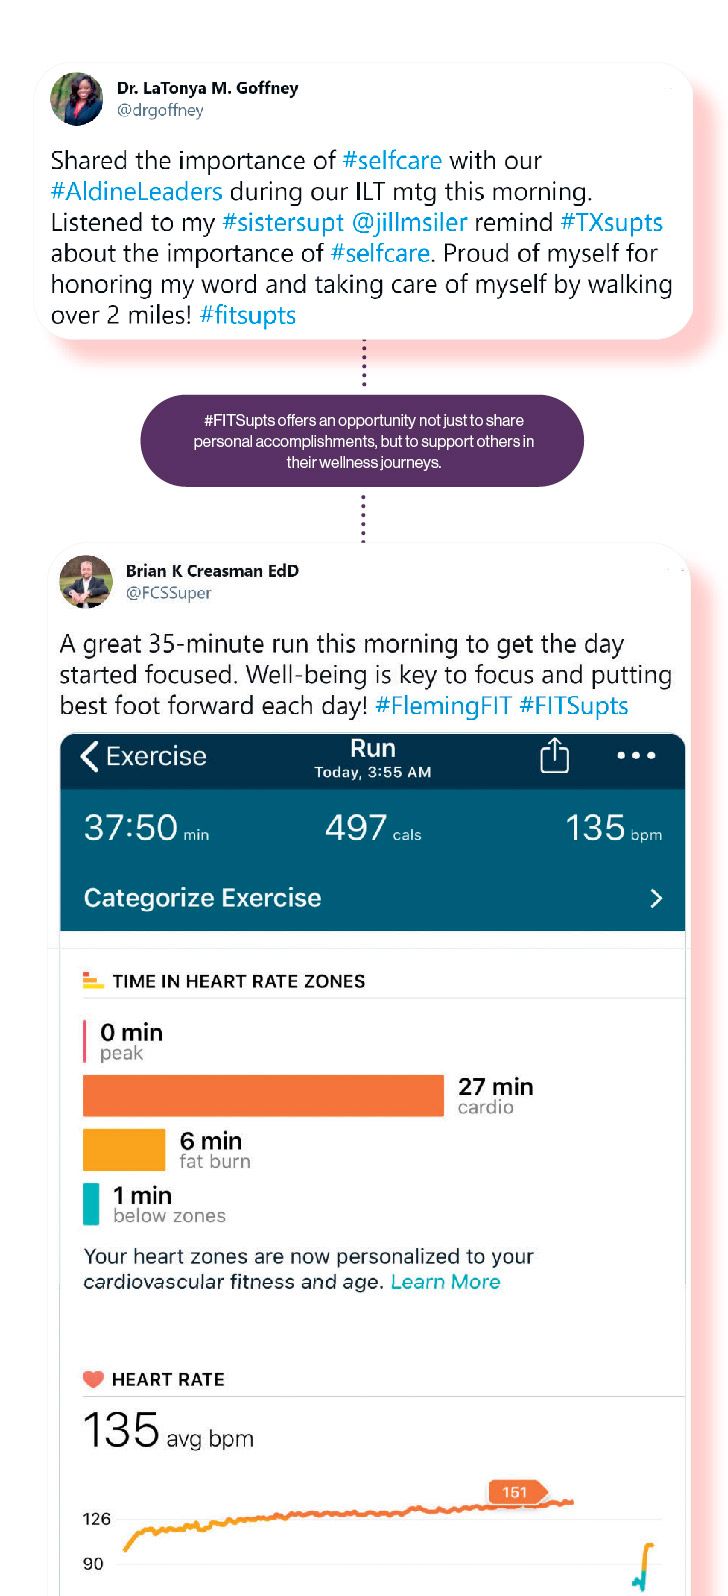 Image: Tweets from LaTonya Goffney and Brian Creasman about their morning workouts, with the SchoolCEO caption '#FitSupts offers an opportunity not just to share personal accomplishments, but to support others in their wellness journeys.'